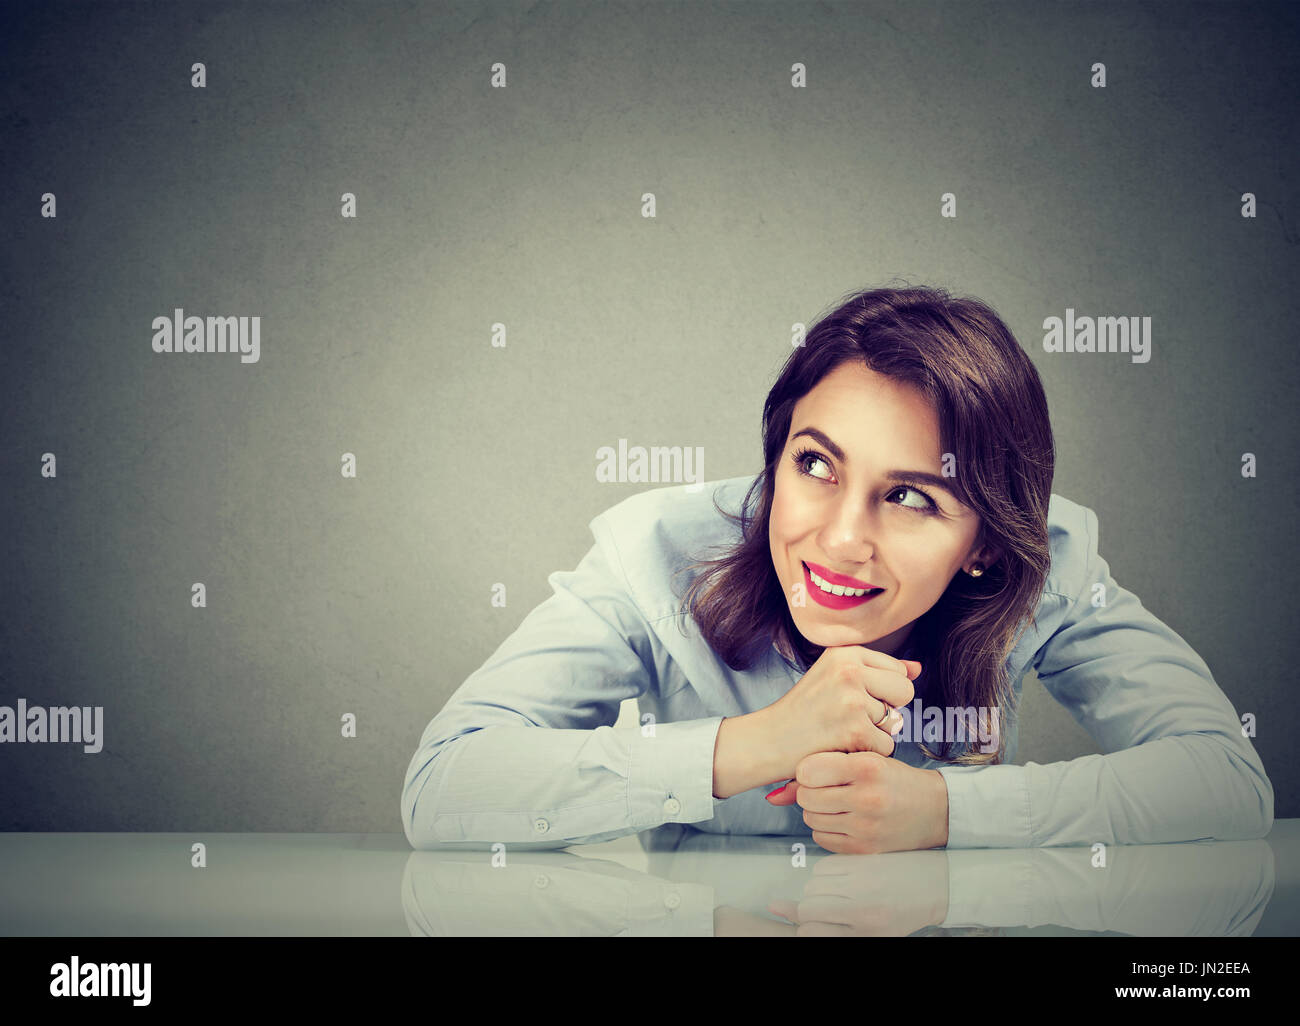 Thinking happy business woman sitting at desk Stock Photo